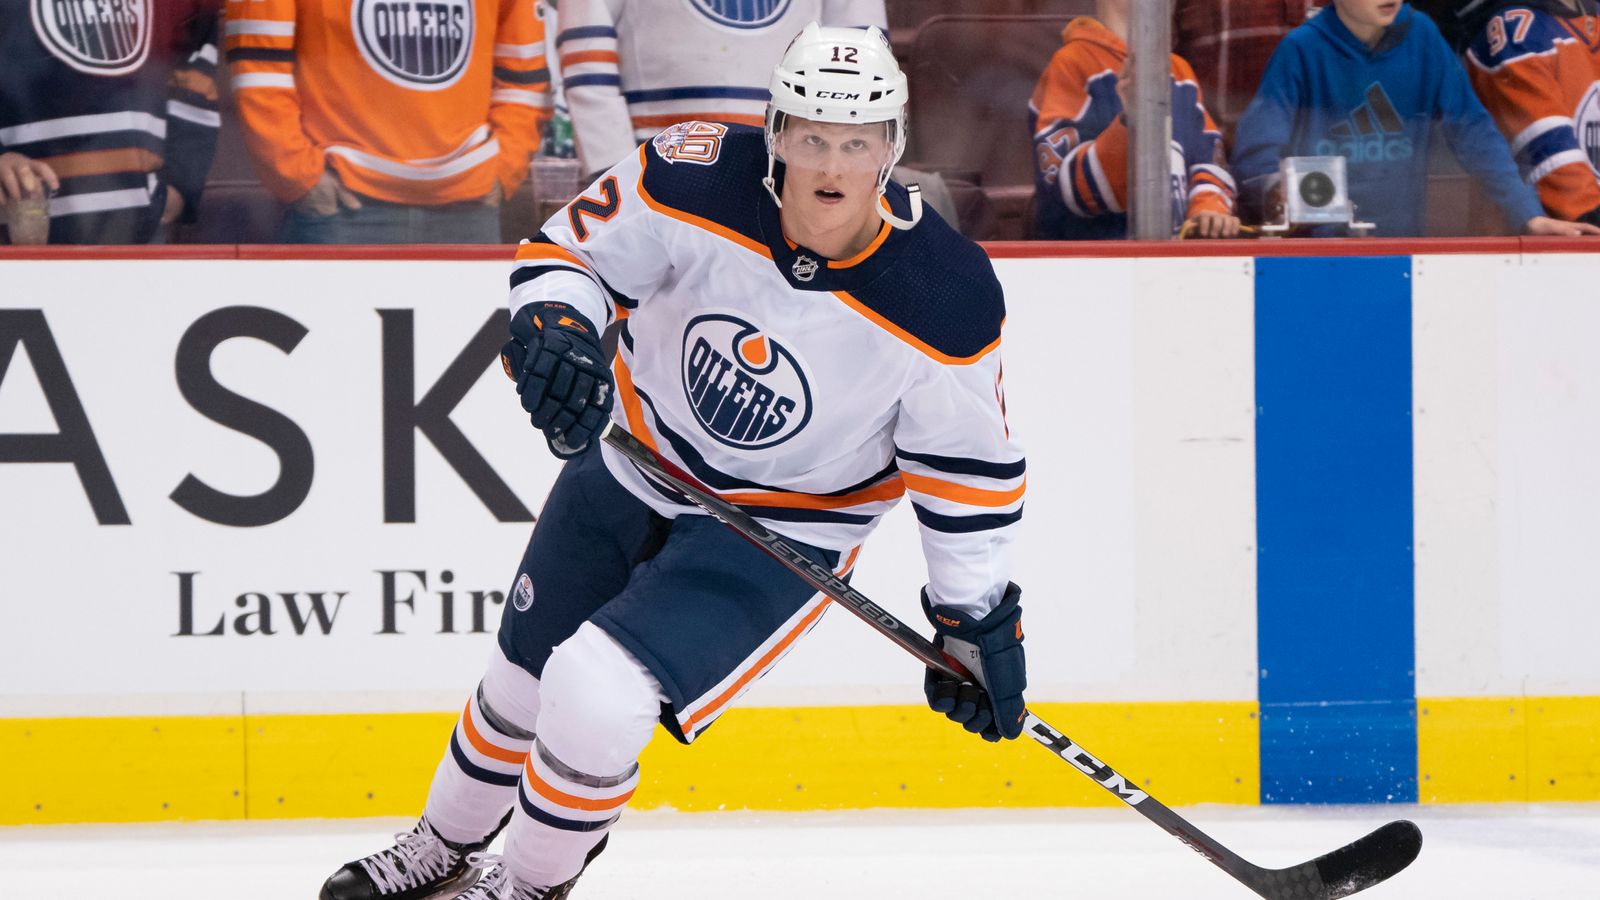 Oilers Player Colby Cave Dead at 25 After Suffering Brain Bleed